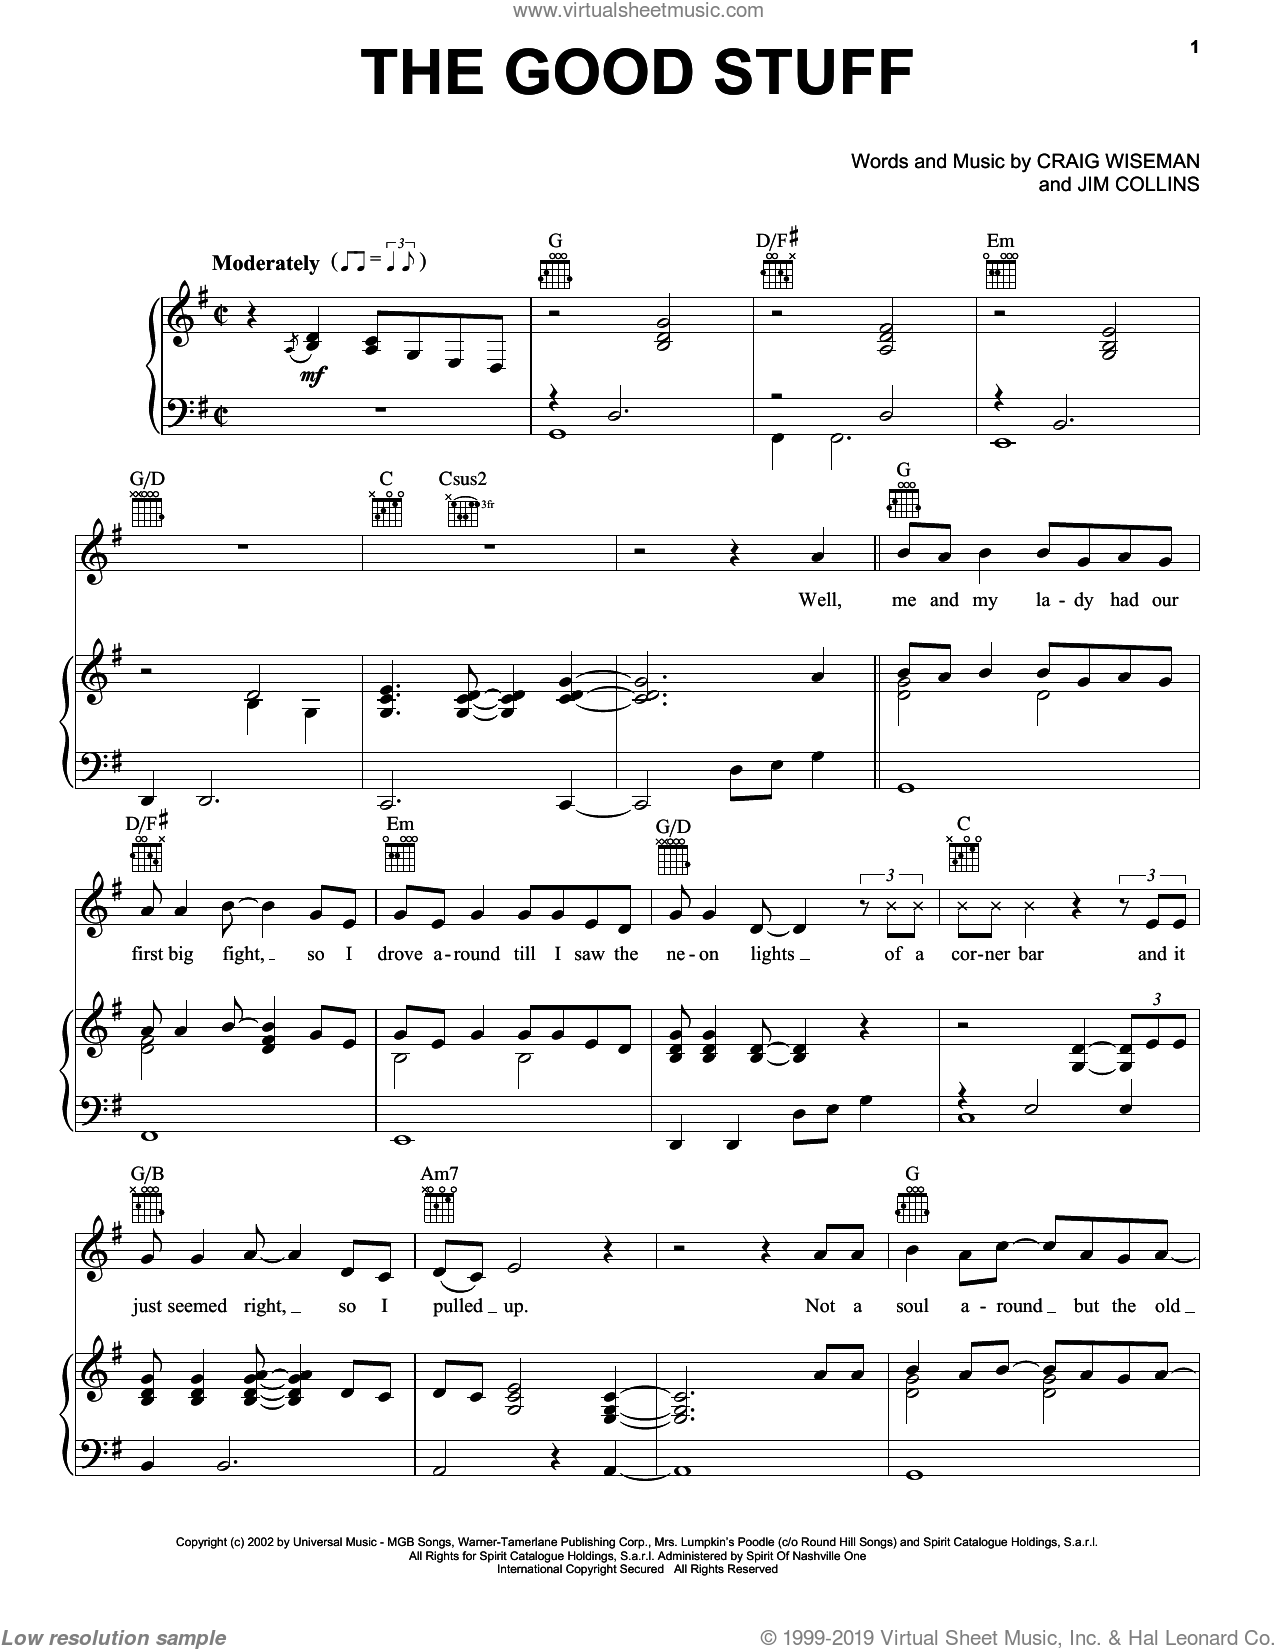 https://cdn3.virtualsheetmusic.com/images/first_pages/HL/HL-2905First_BIG.png